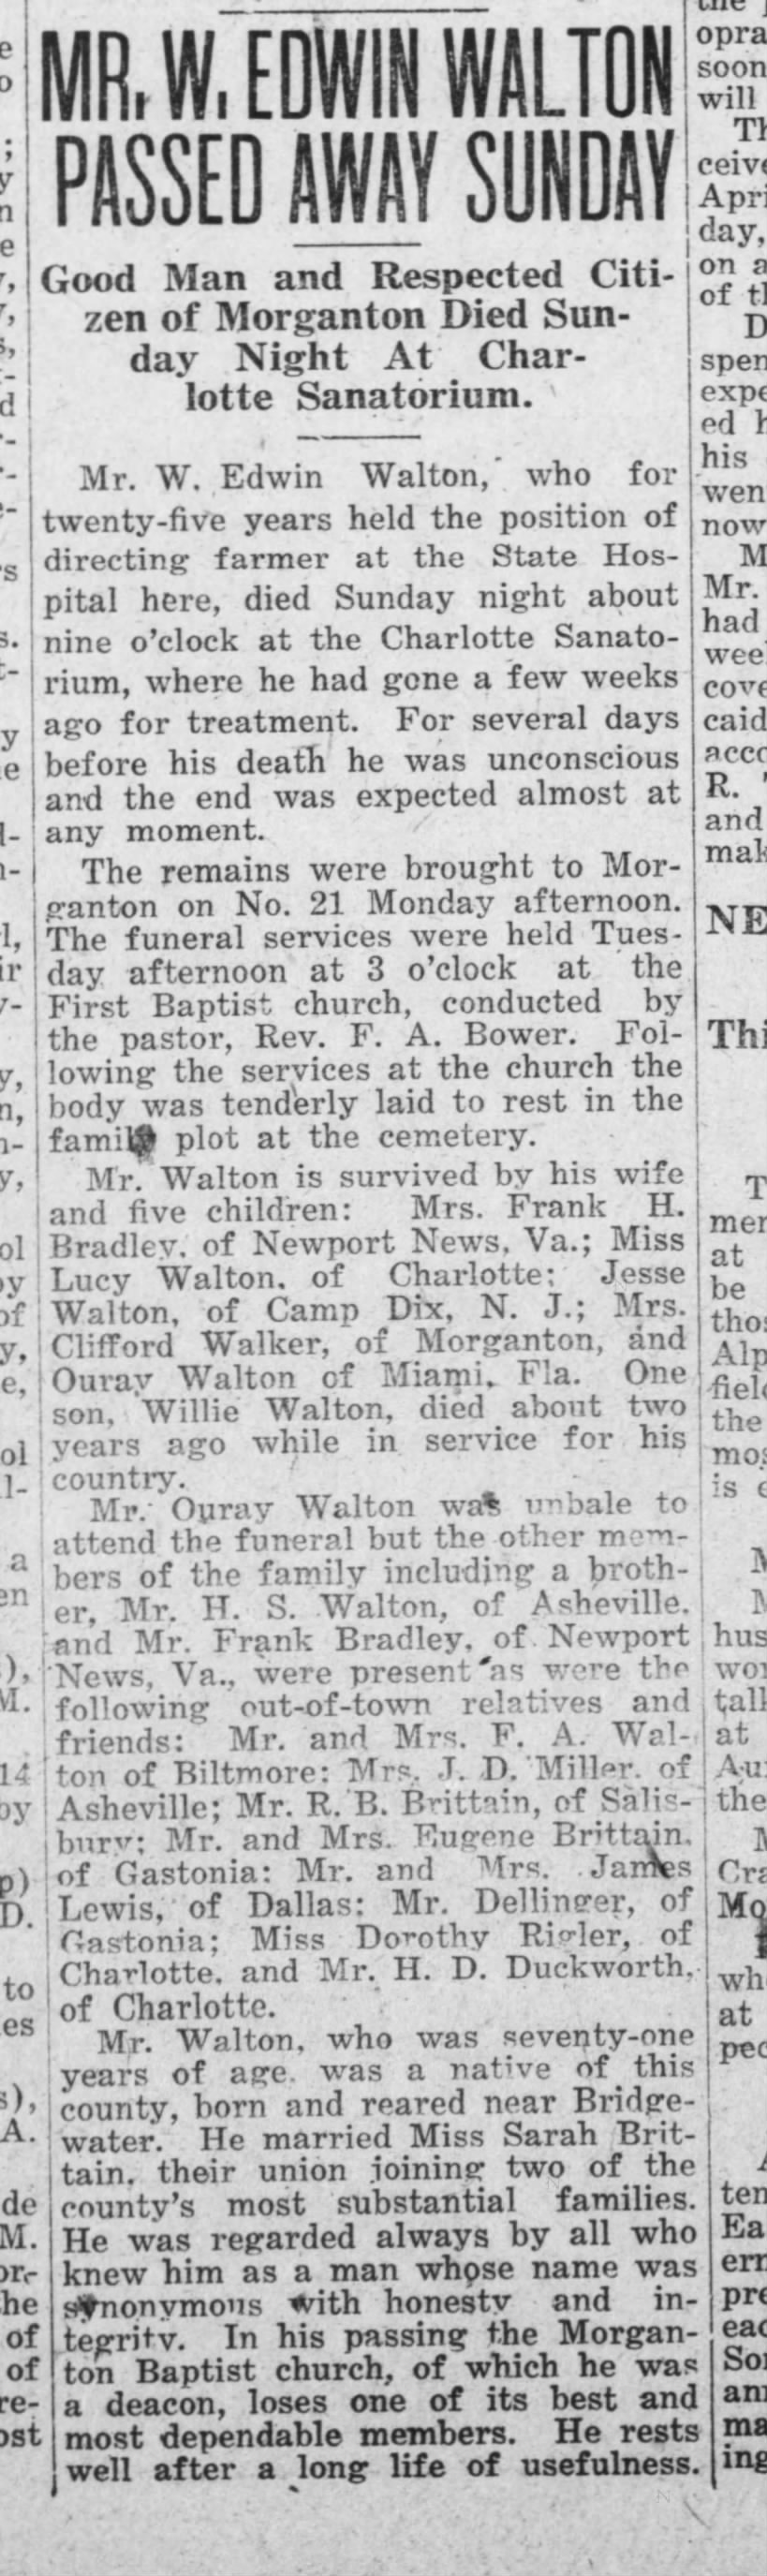 Obit for Mr. W. Edwin Walton of Morganton, attended by H D Duckworth of Charlotte, NC